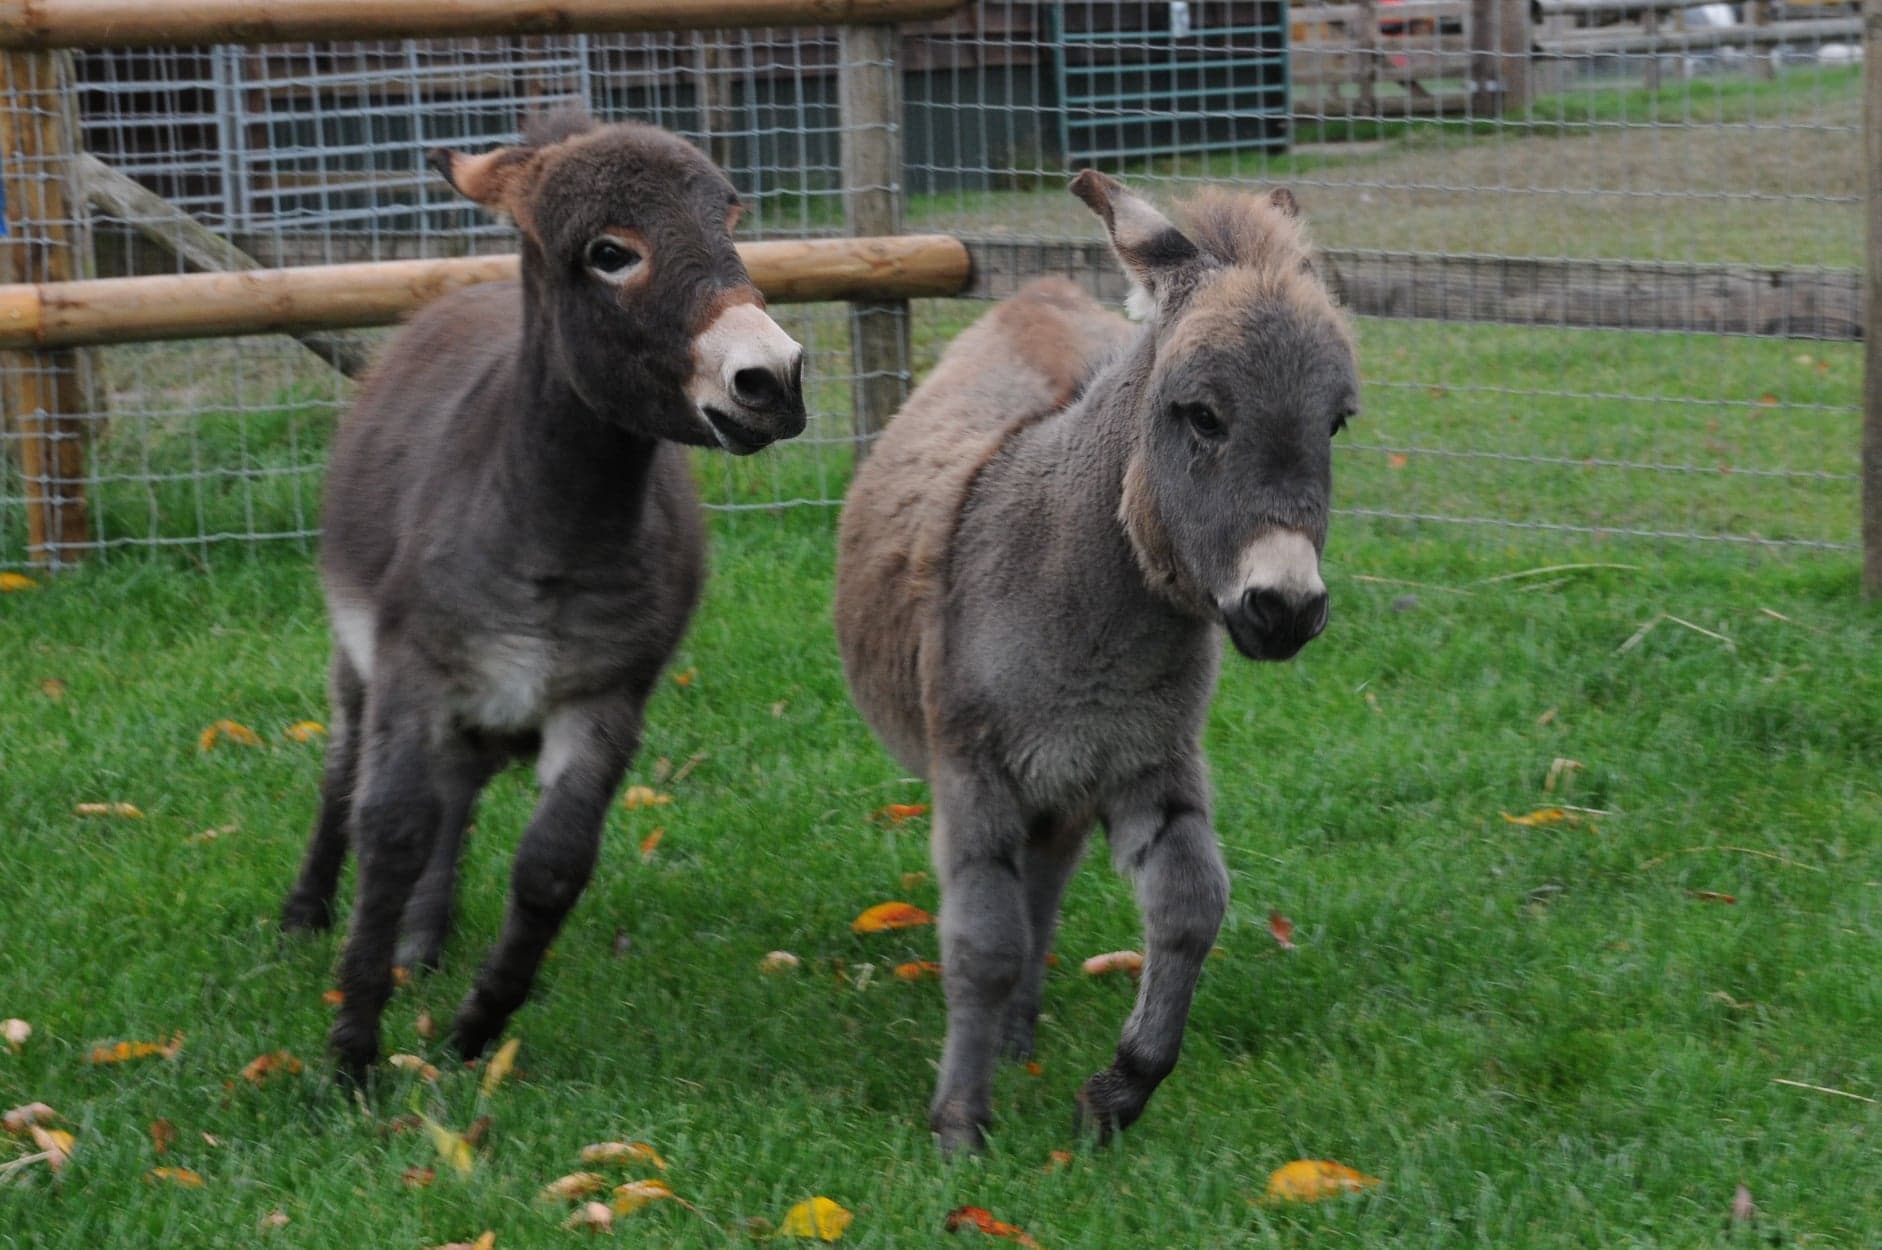 FEATURED | Two miniature donkeys are causing mayhem at a county farm park born out of very sad circumstances